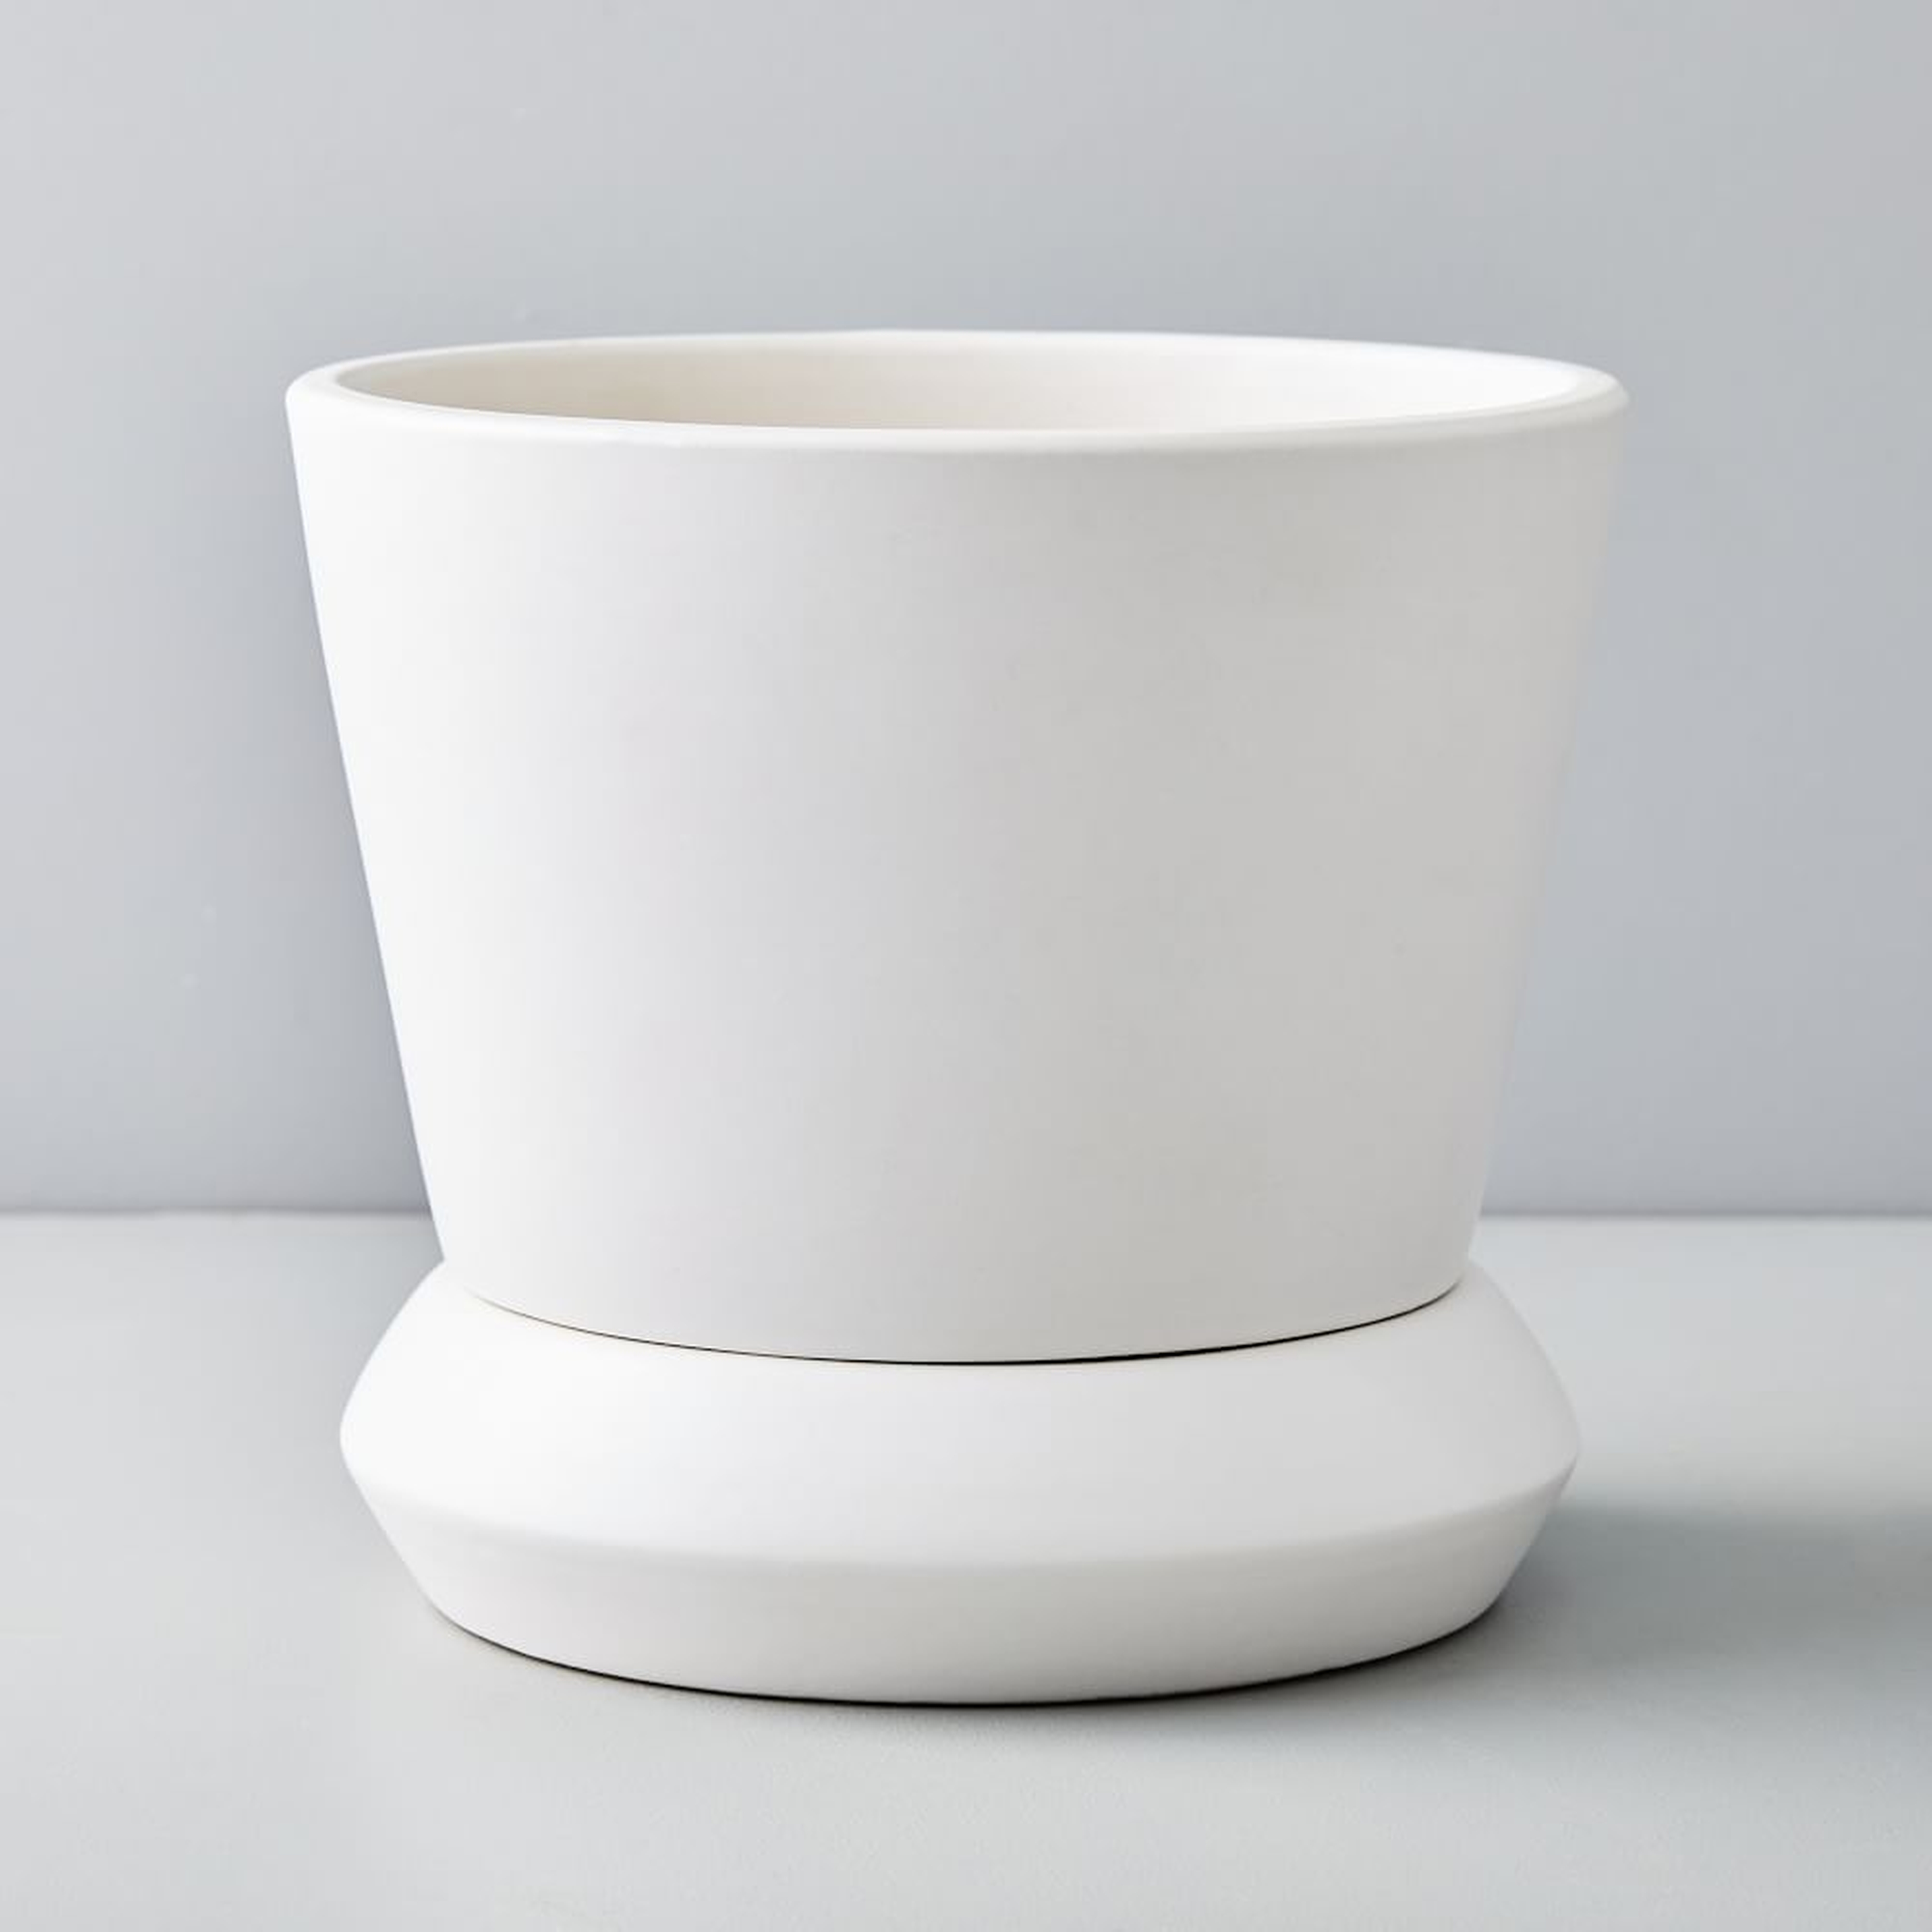 Totem Tabletop Planters, White, Large - West Elm